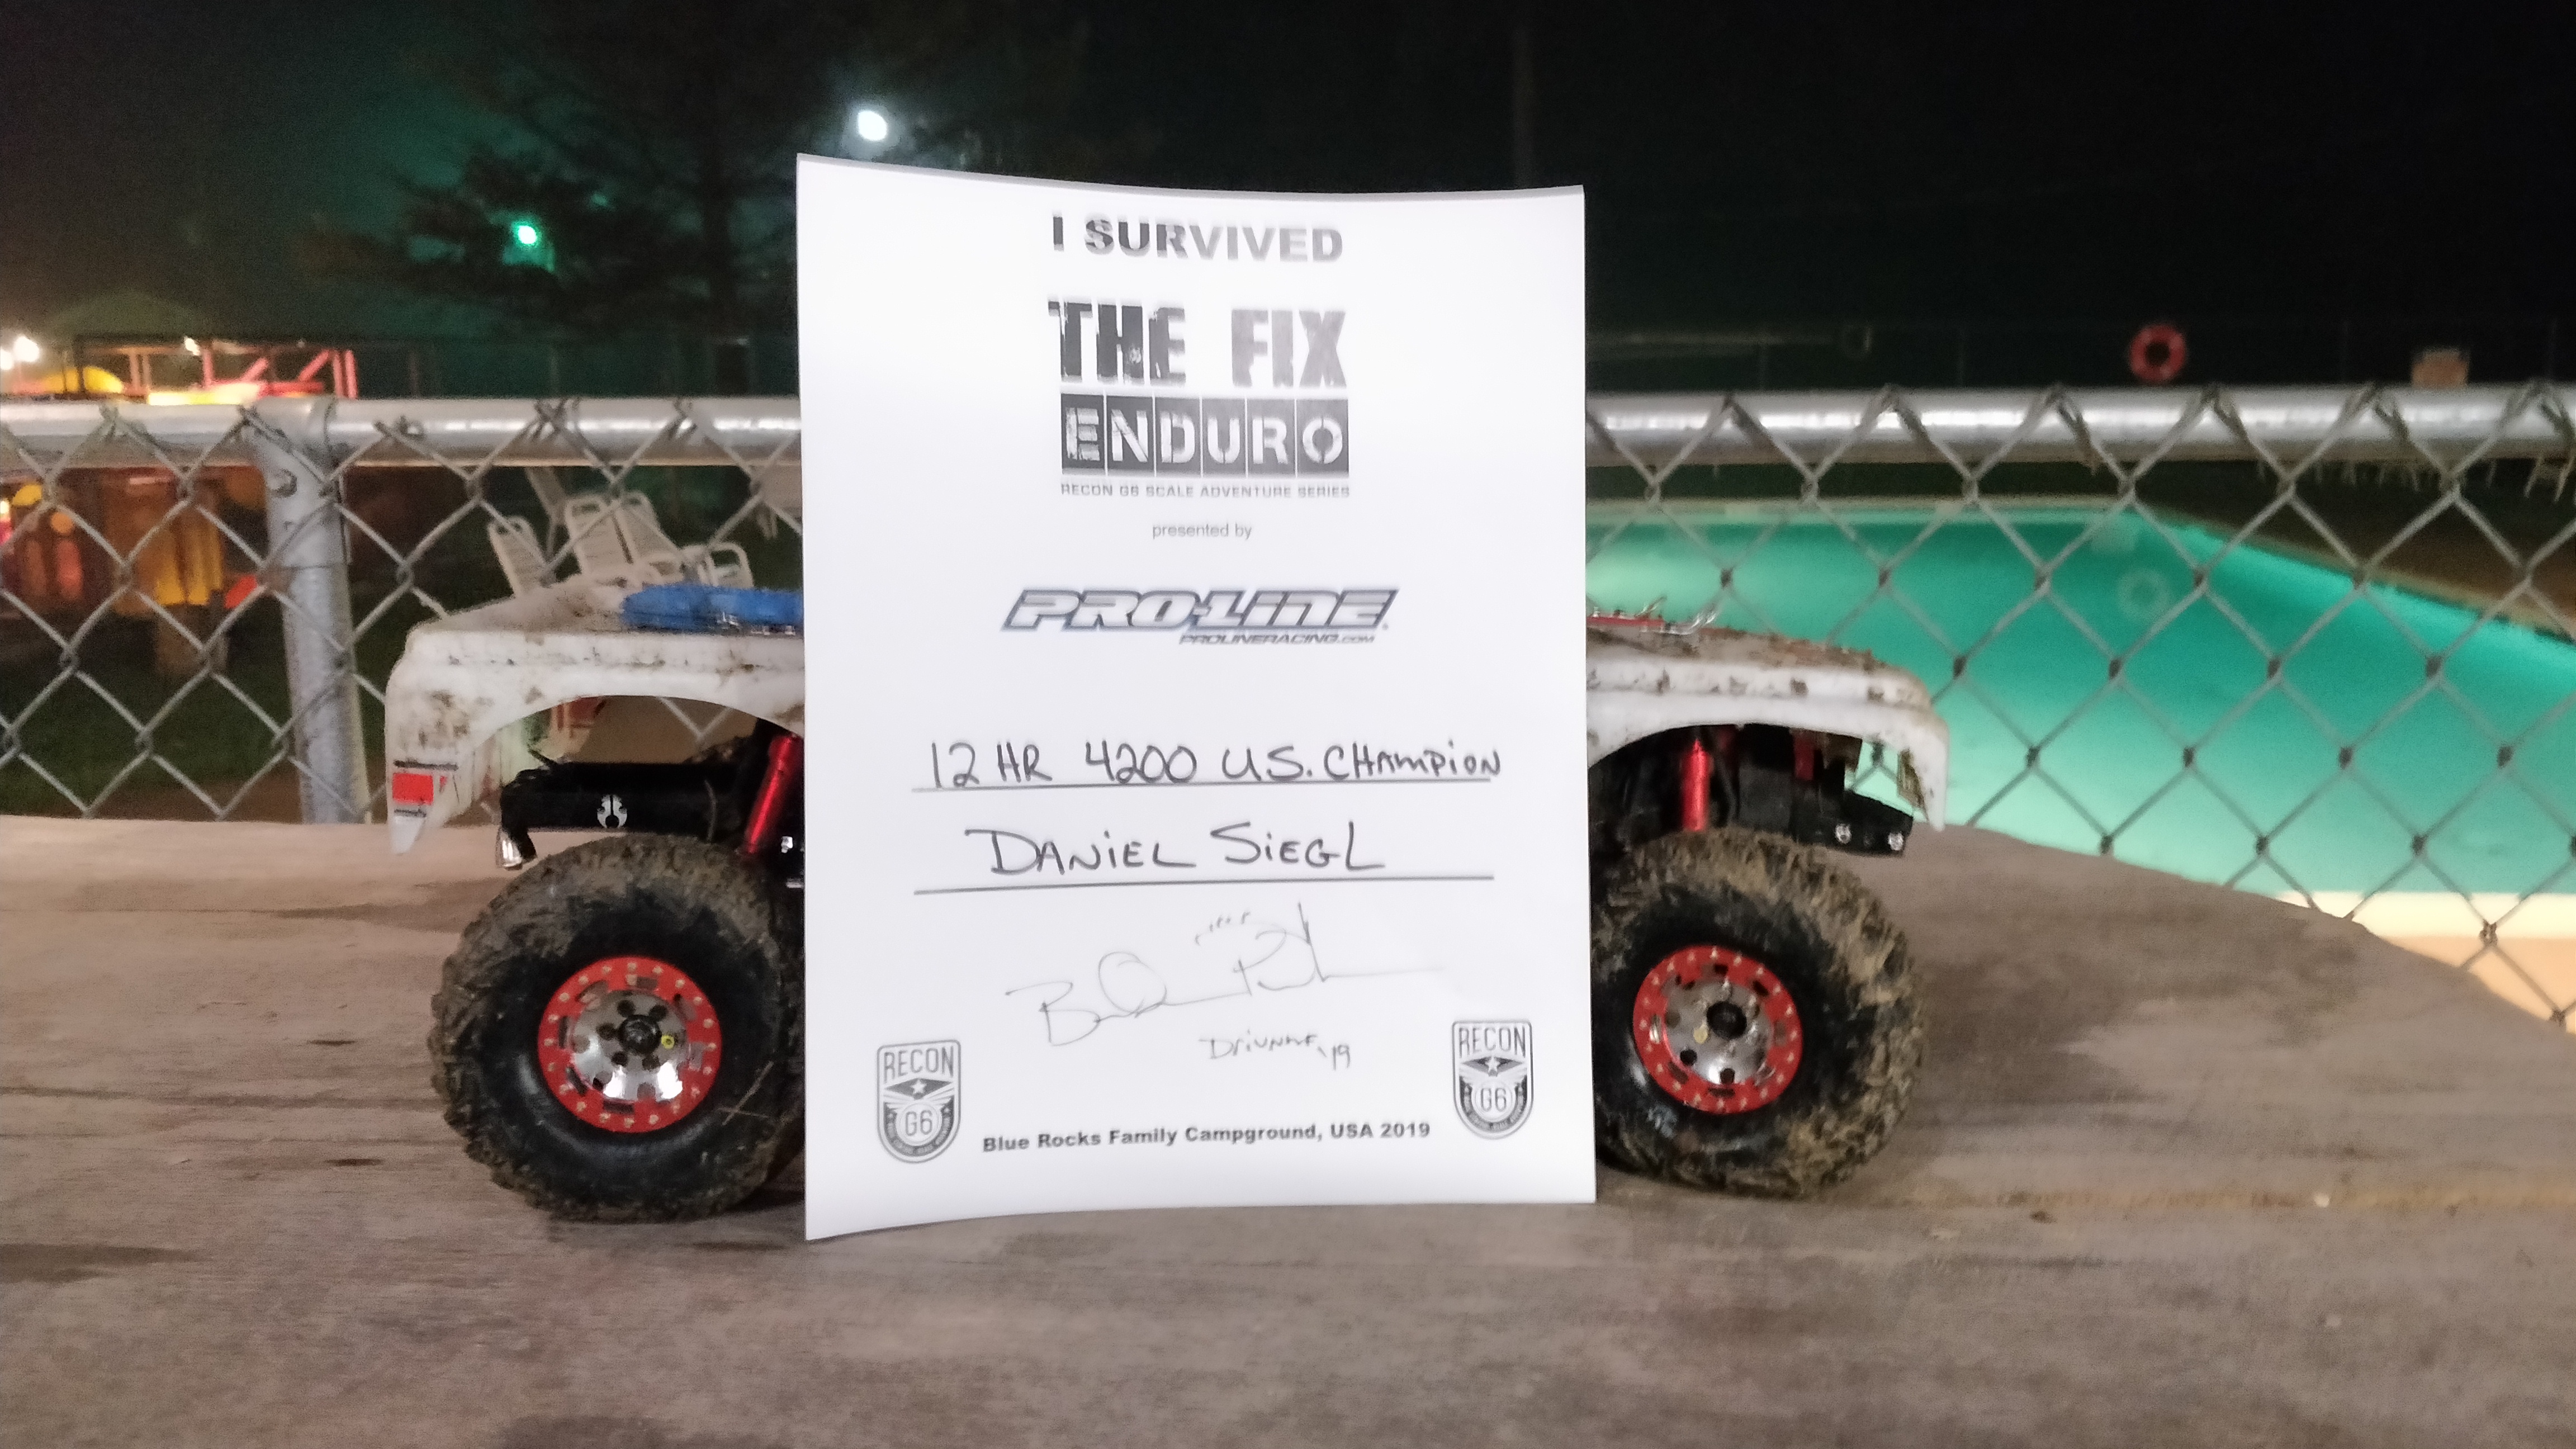 Endure It! Daniel wins the 4.19 Class with RC4WD Equipped 10.2 at the US Fix